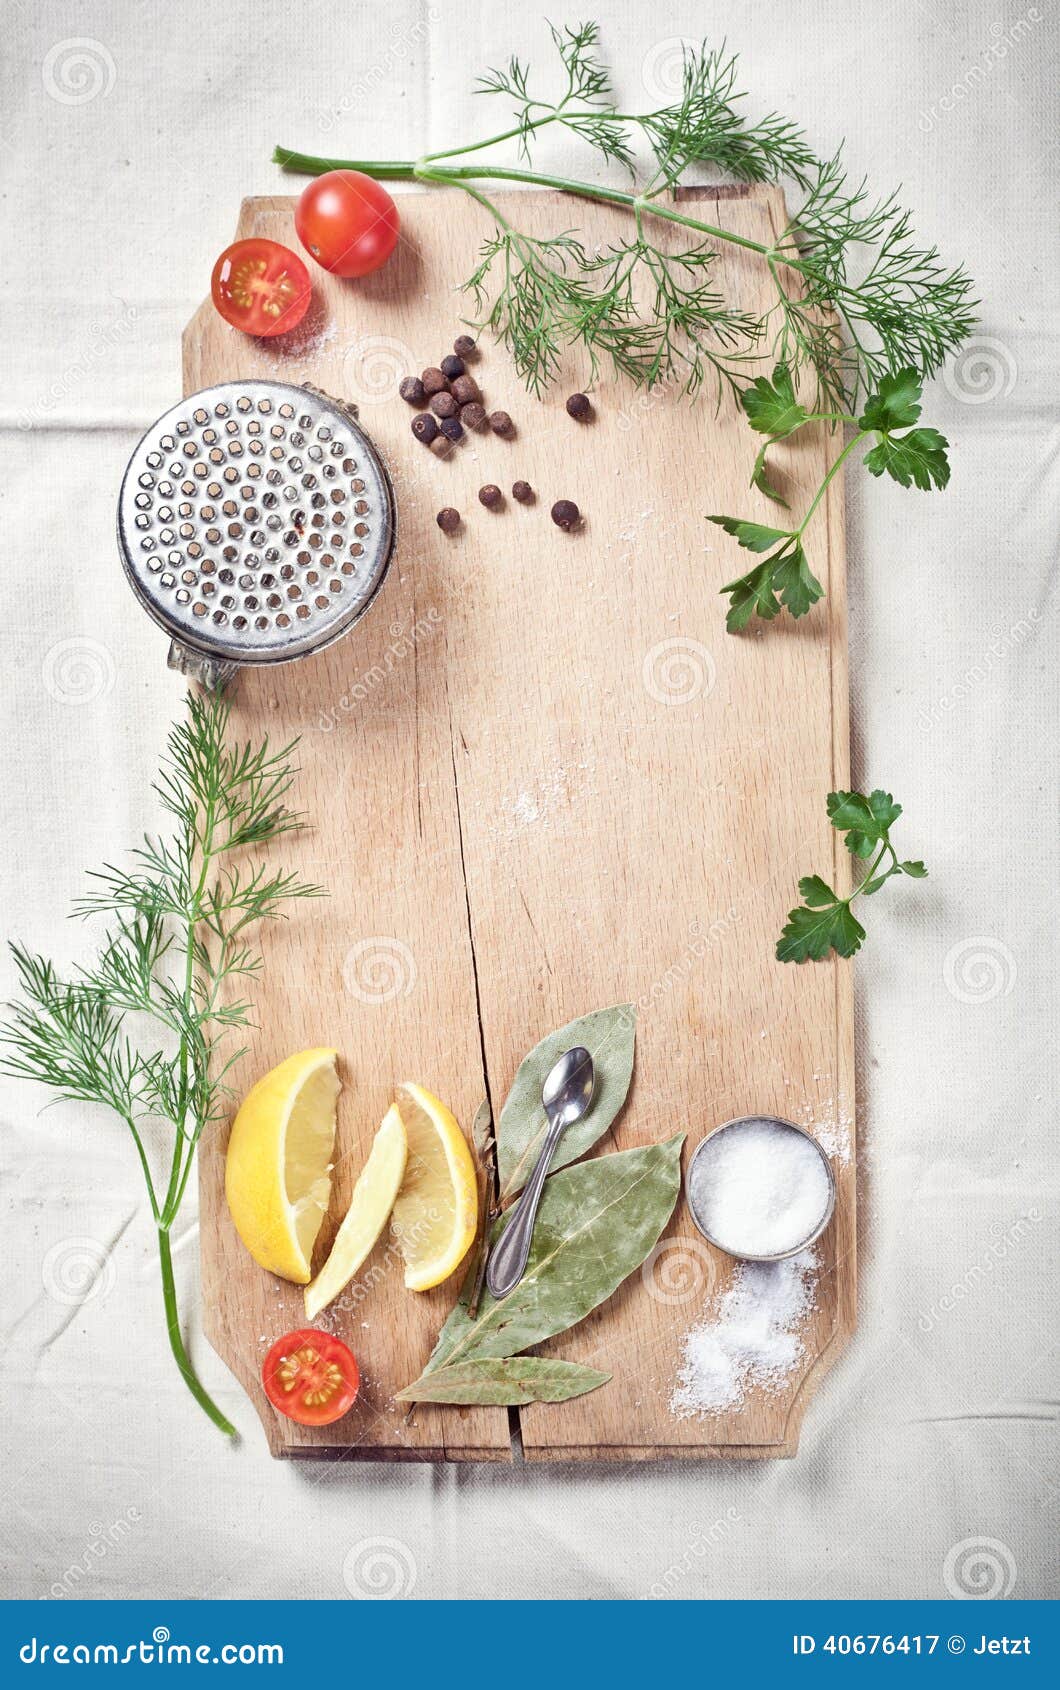 Kitchen Utensils, Spices and Herbs for Cooking Fish Stock Image